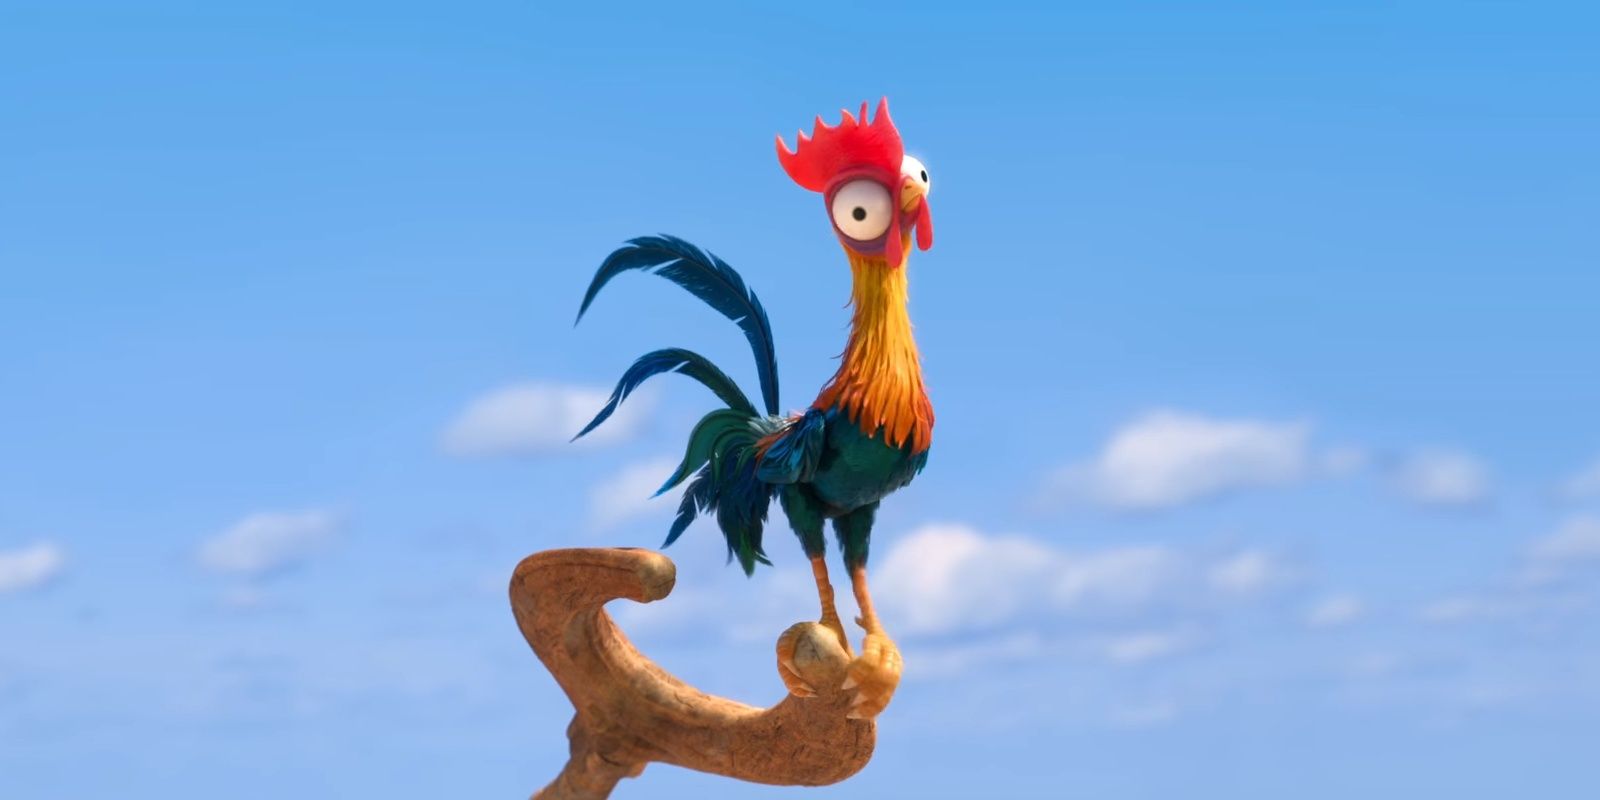 Heihei standing on top of a stick in Moana